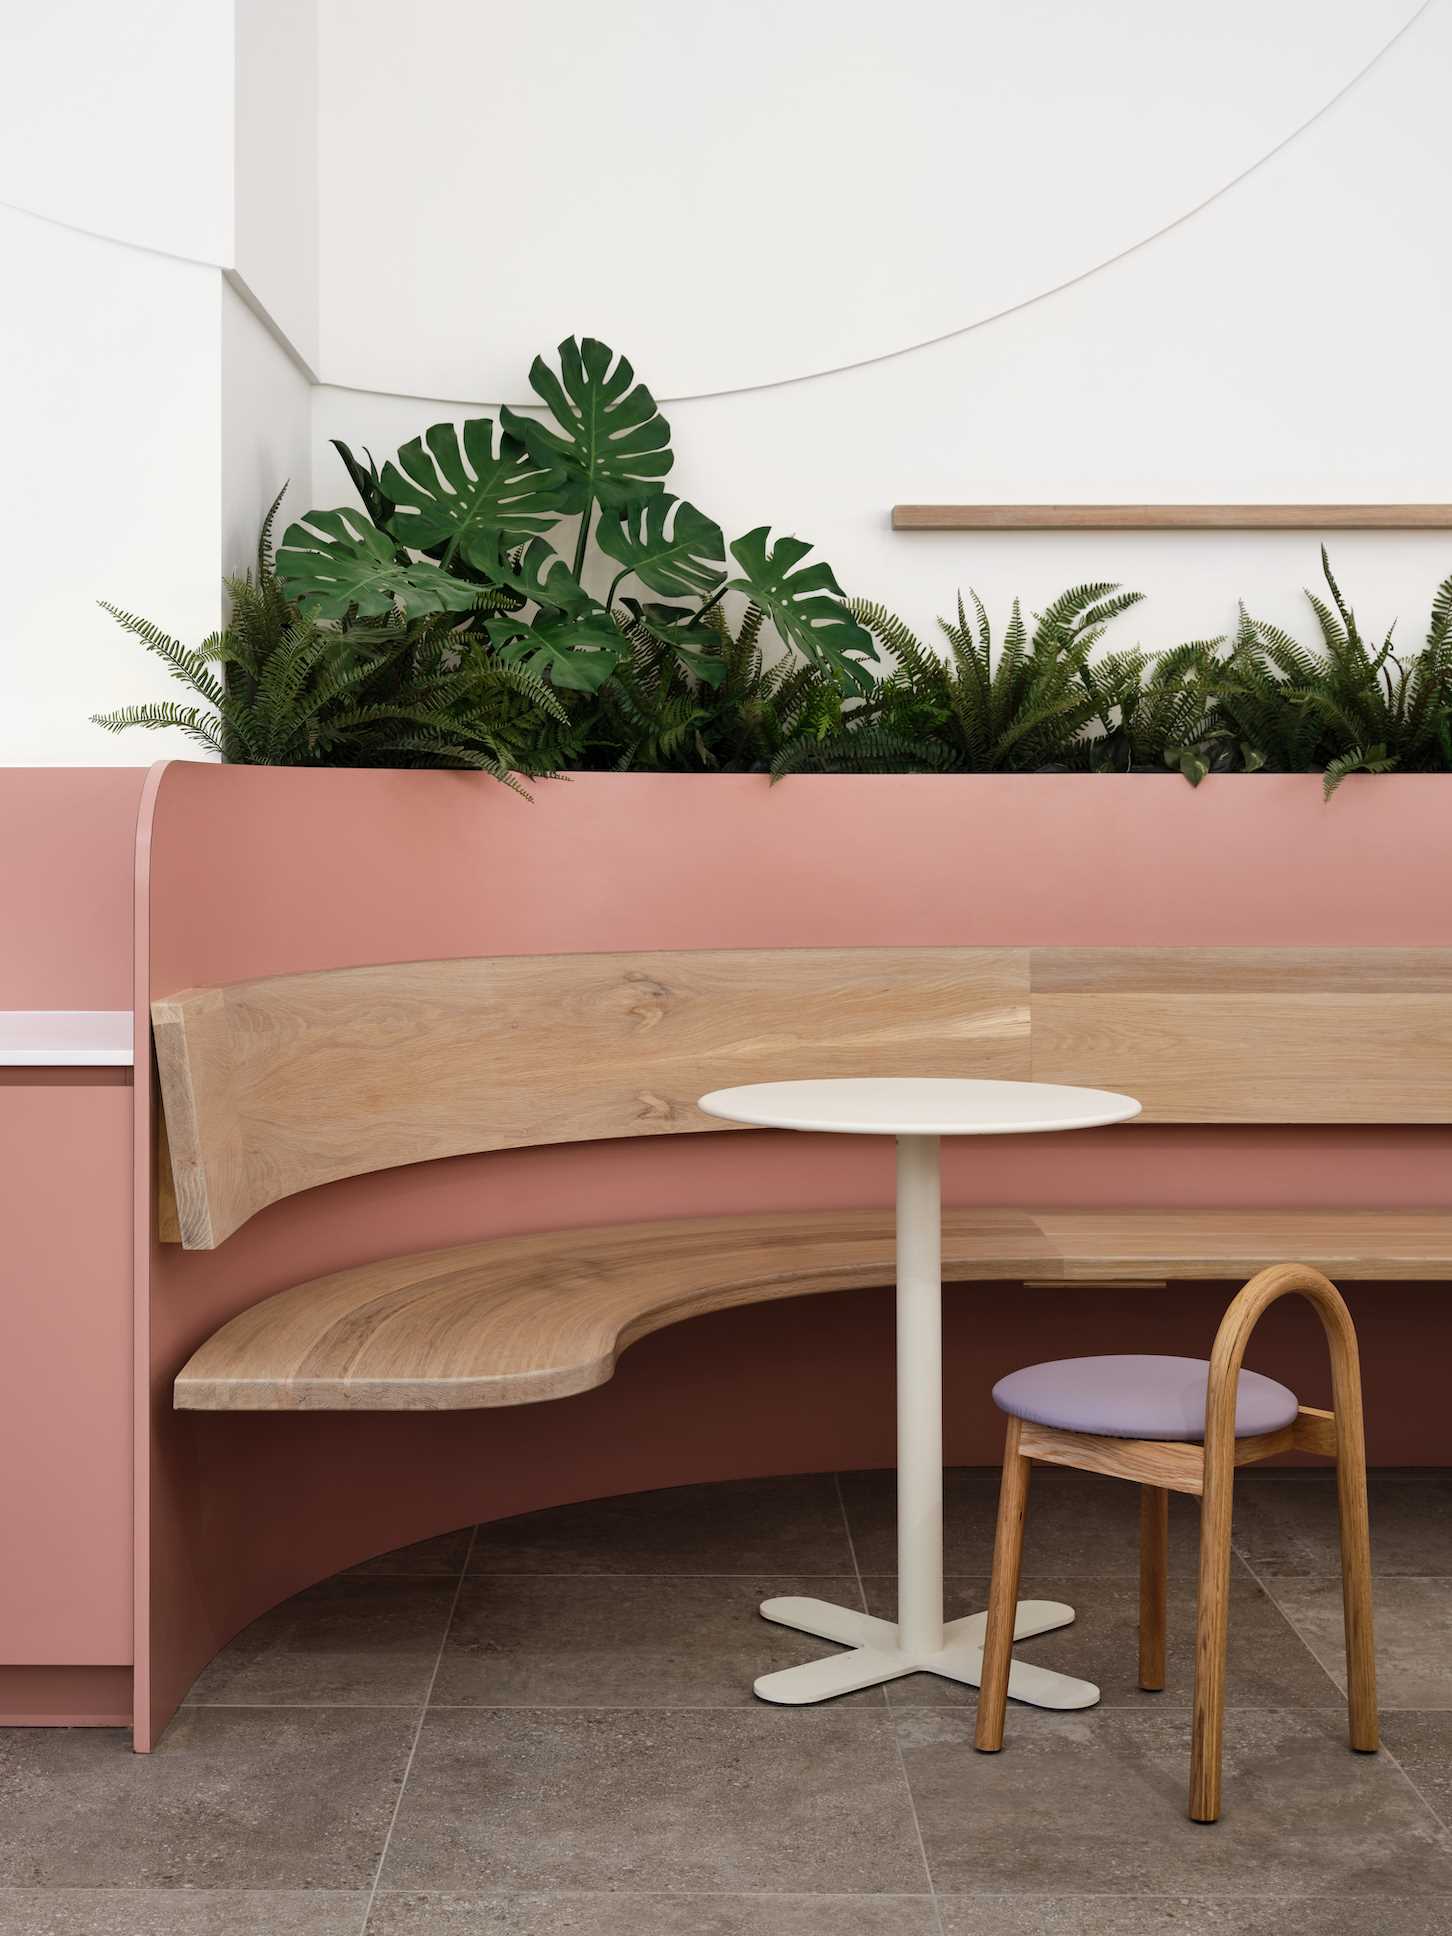 A modern cafe with plants and curved banquette seating.